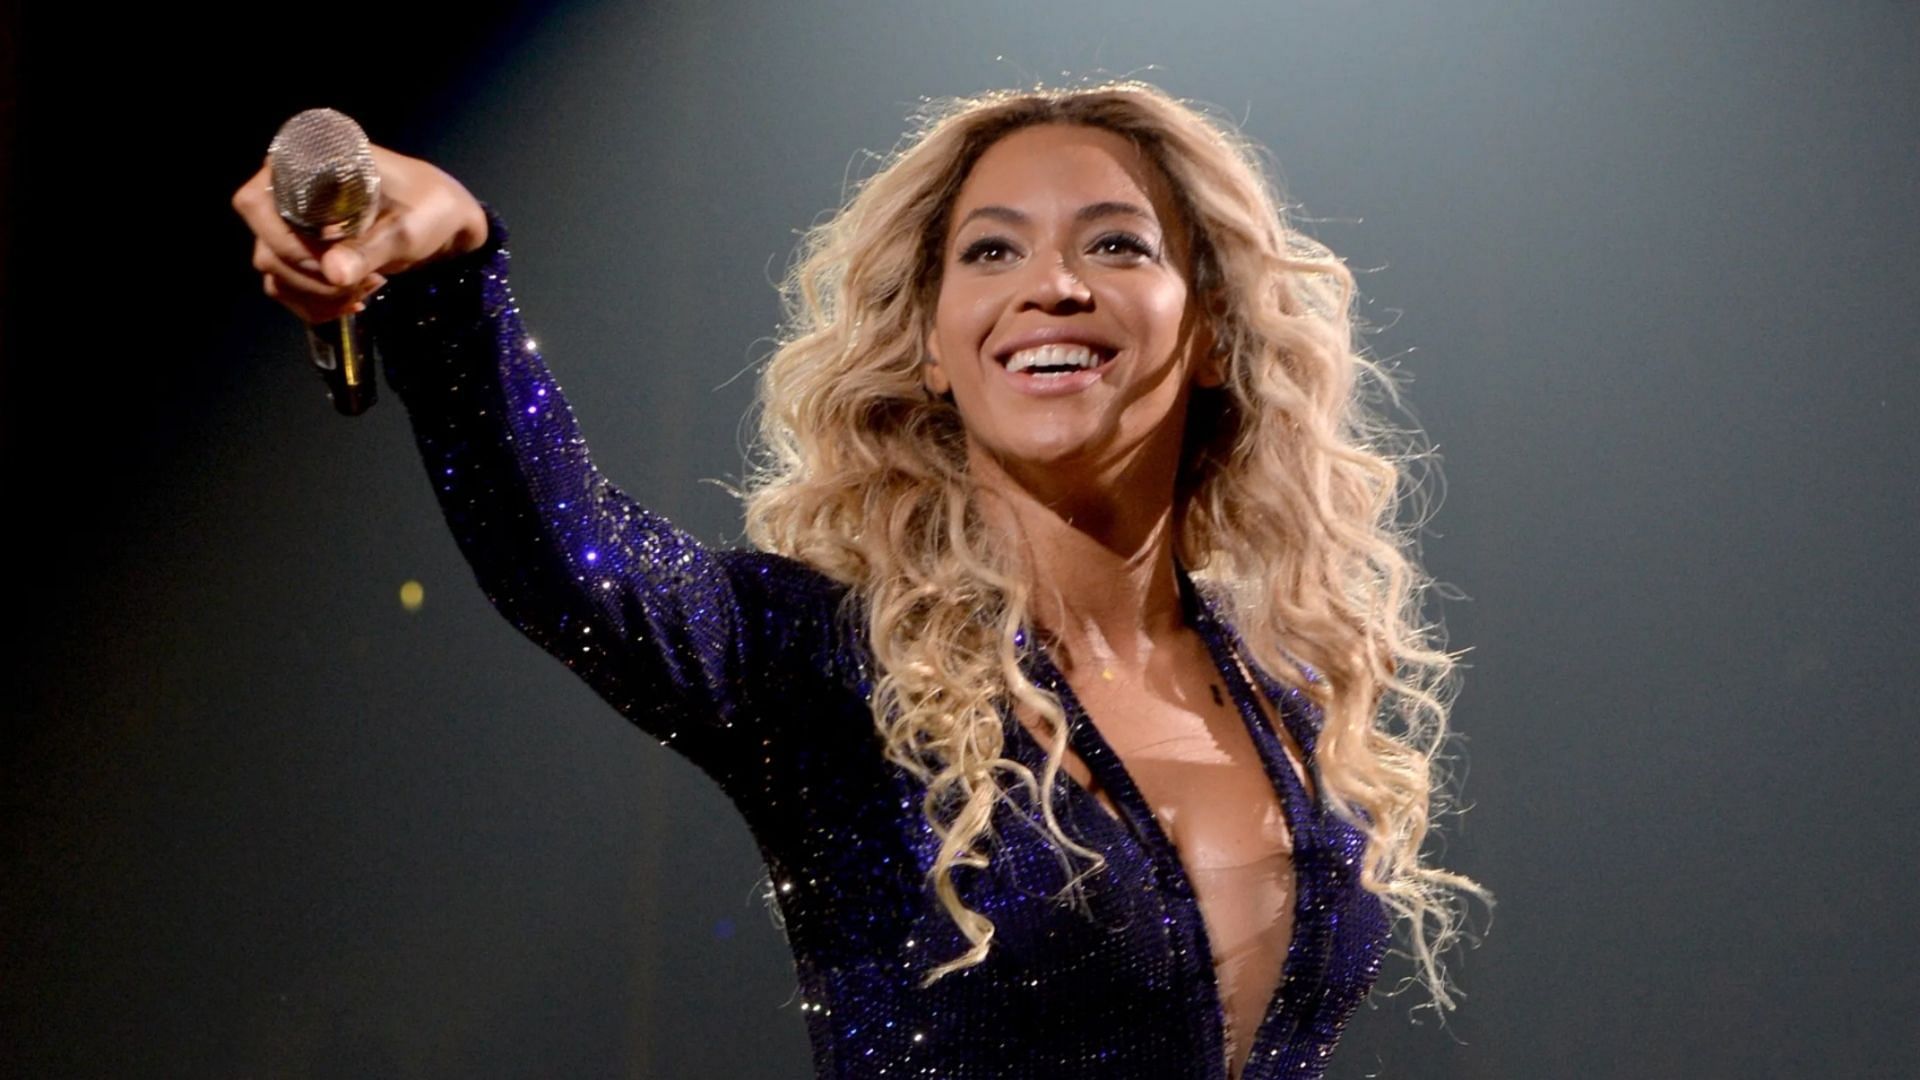 Beyonce released the first song from her upcoming album. (Image via Getty)